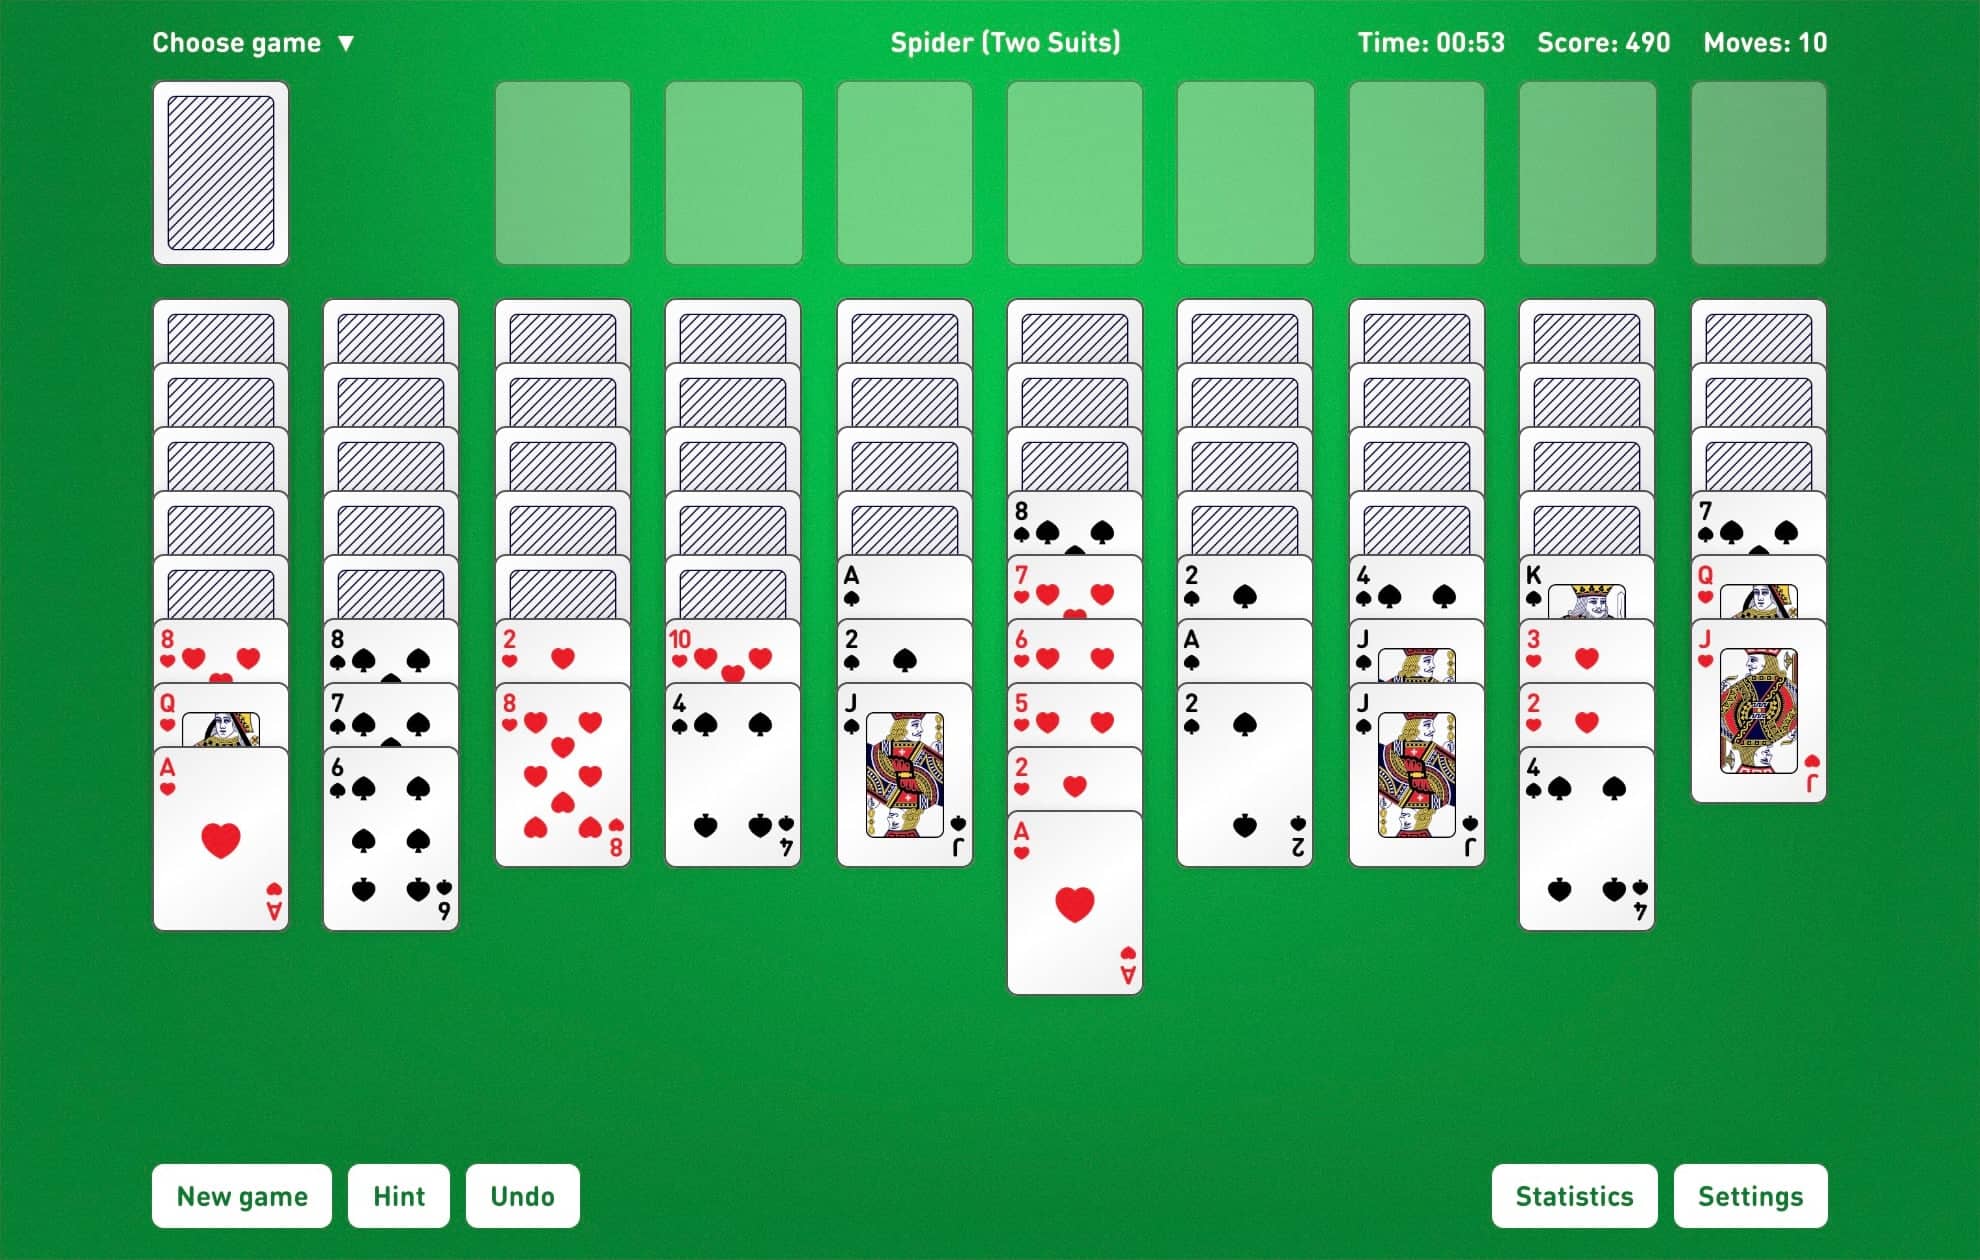 Spider Solitaire 2 Suits - Play The Free Mobile Game Online